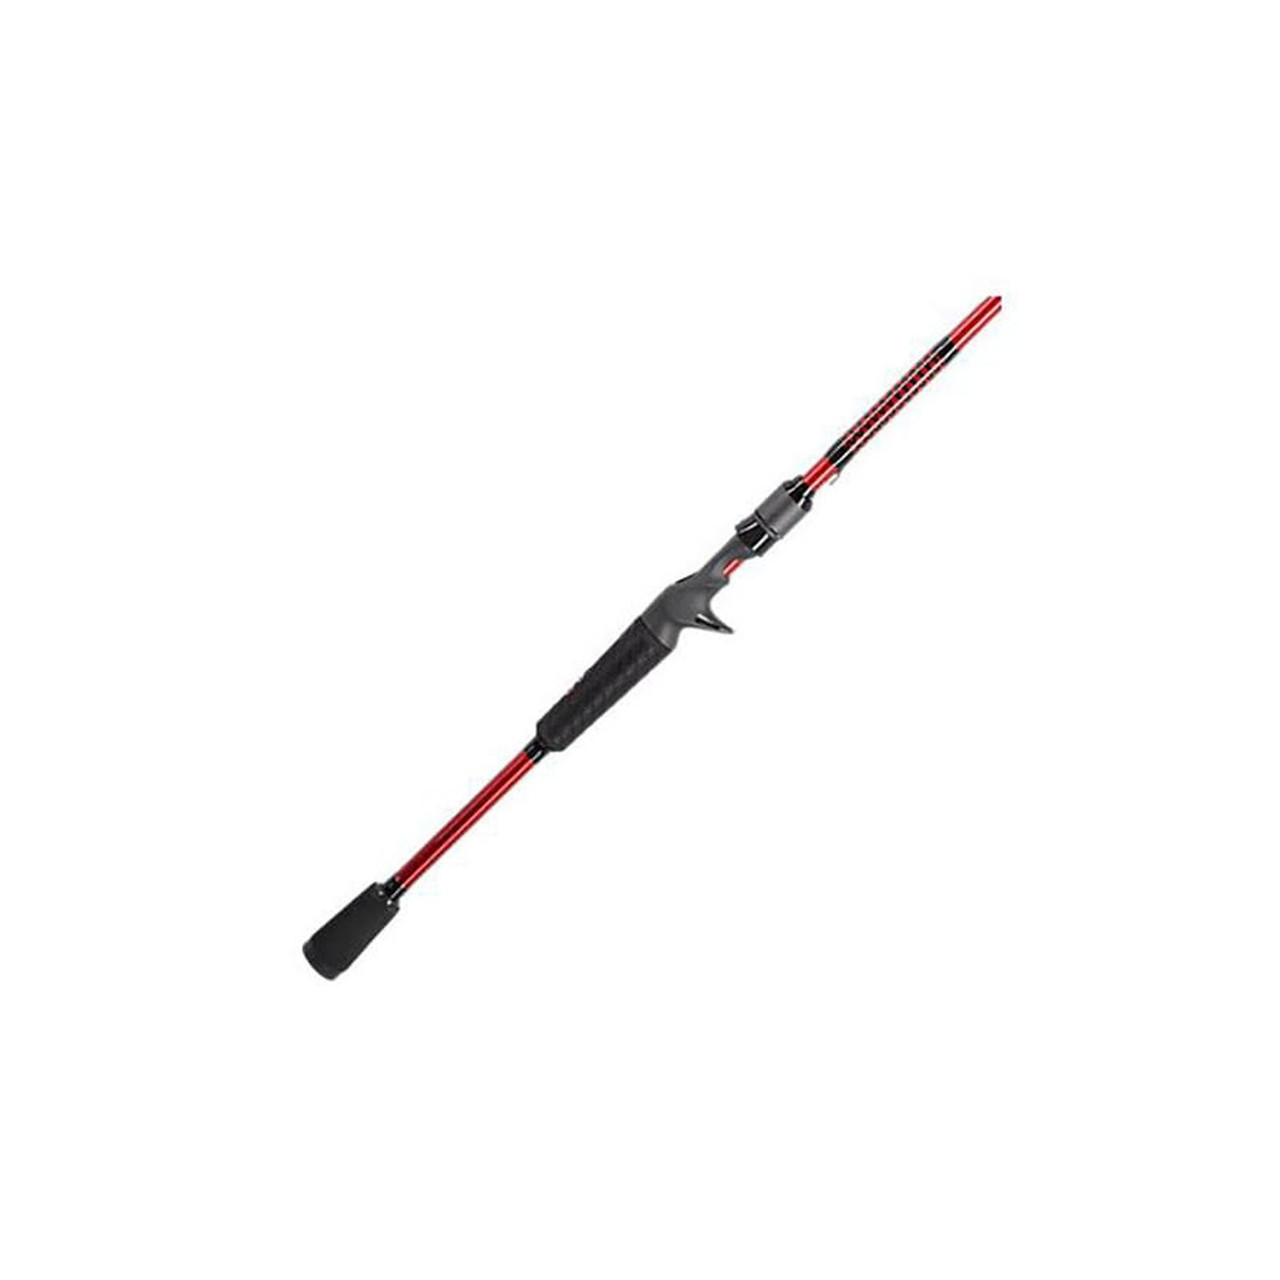 Shakespeare Ugly Stik Carbon Casting Rods - Sportsman Fulfillment